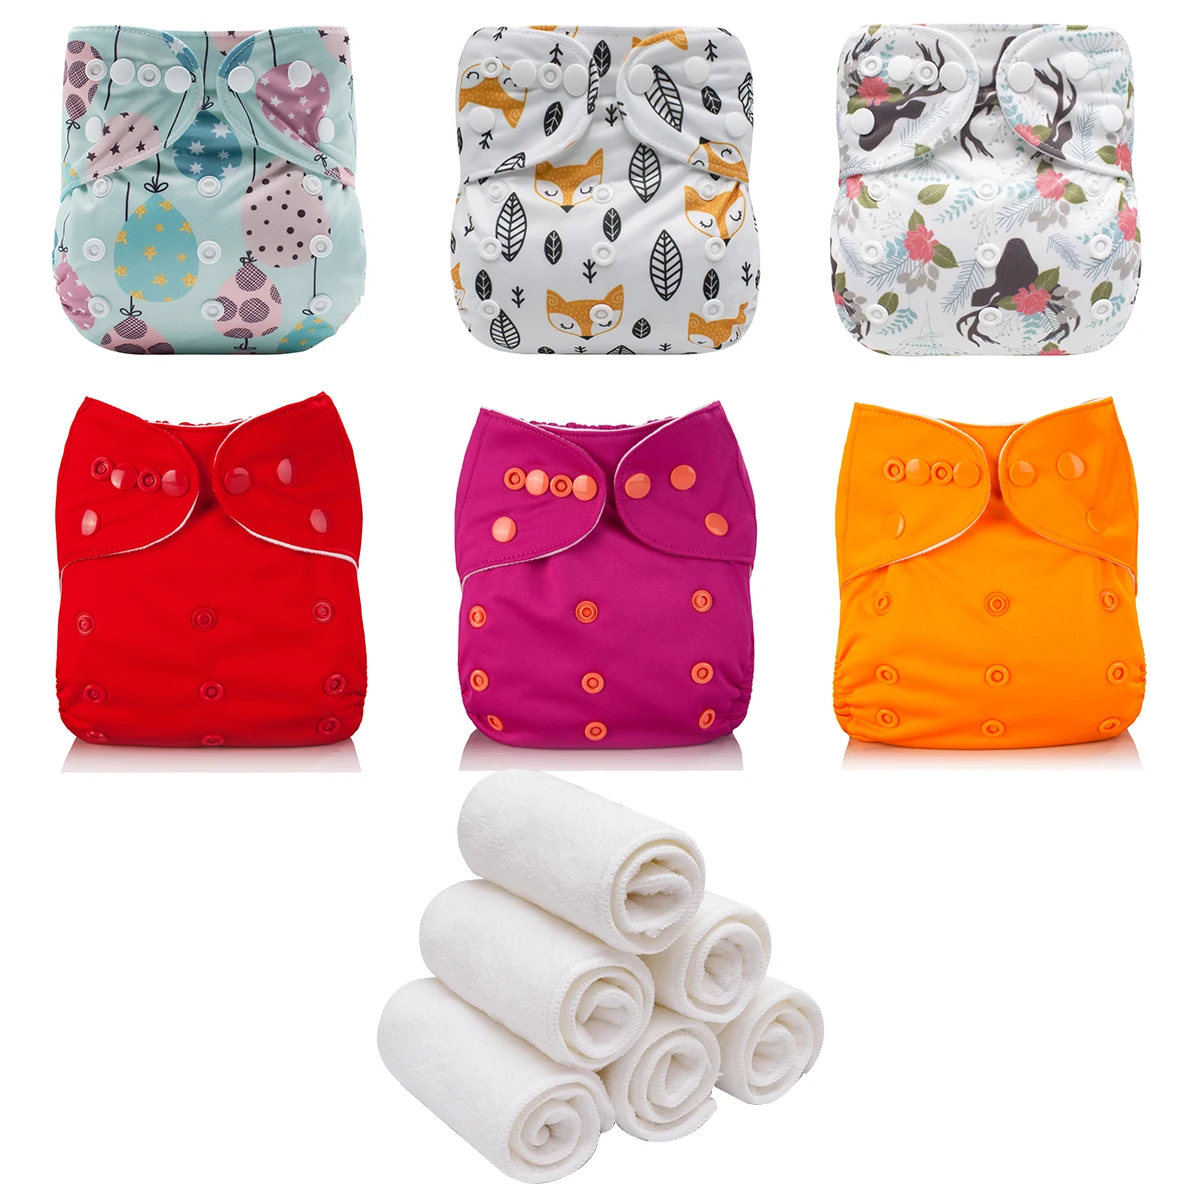 Mumsbest New Matching Waterproof Washable Baby Pokcet Diapers 8Pcs Suede Baby Cloth Diaper and 8Pcs Microfiber Insert